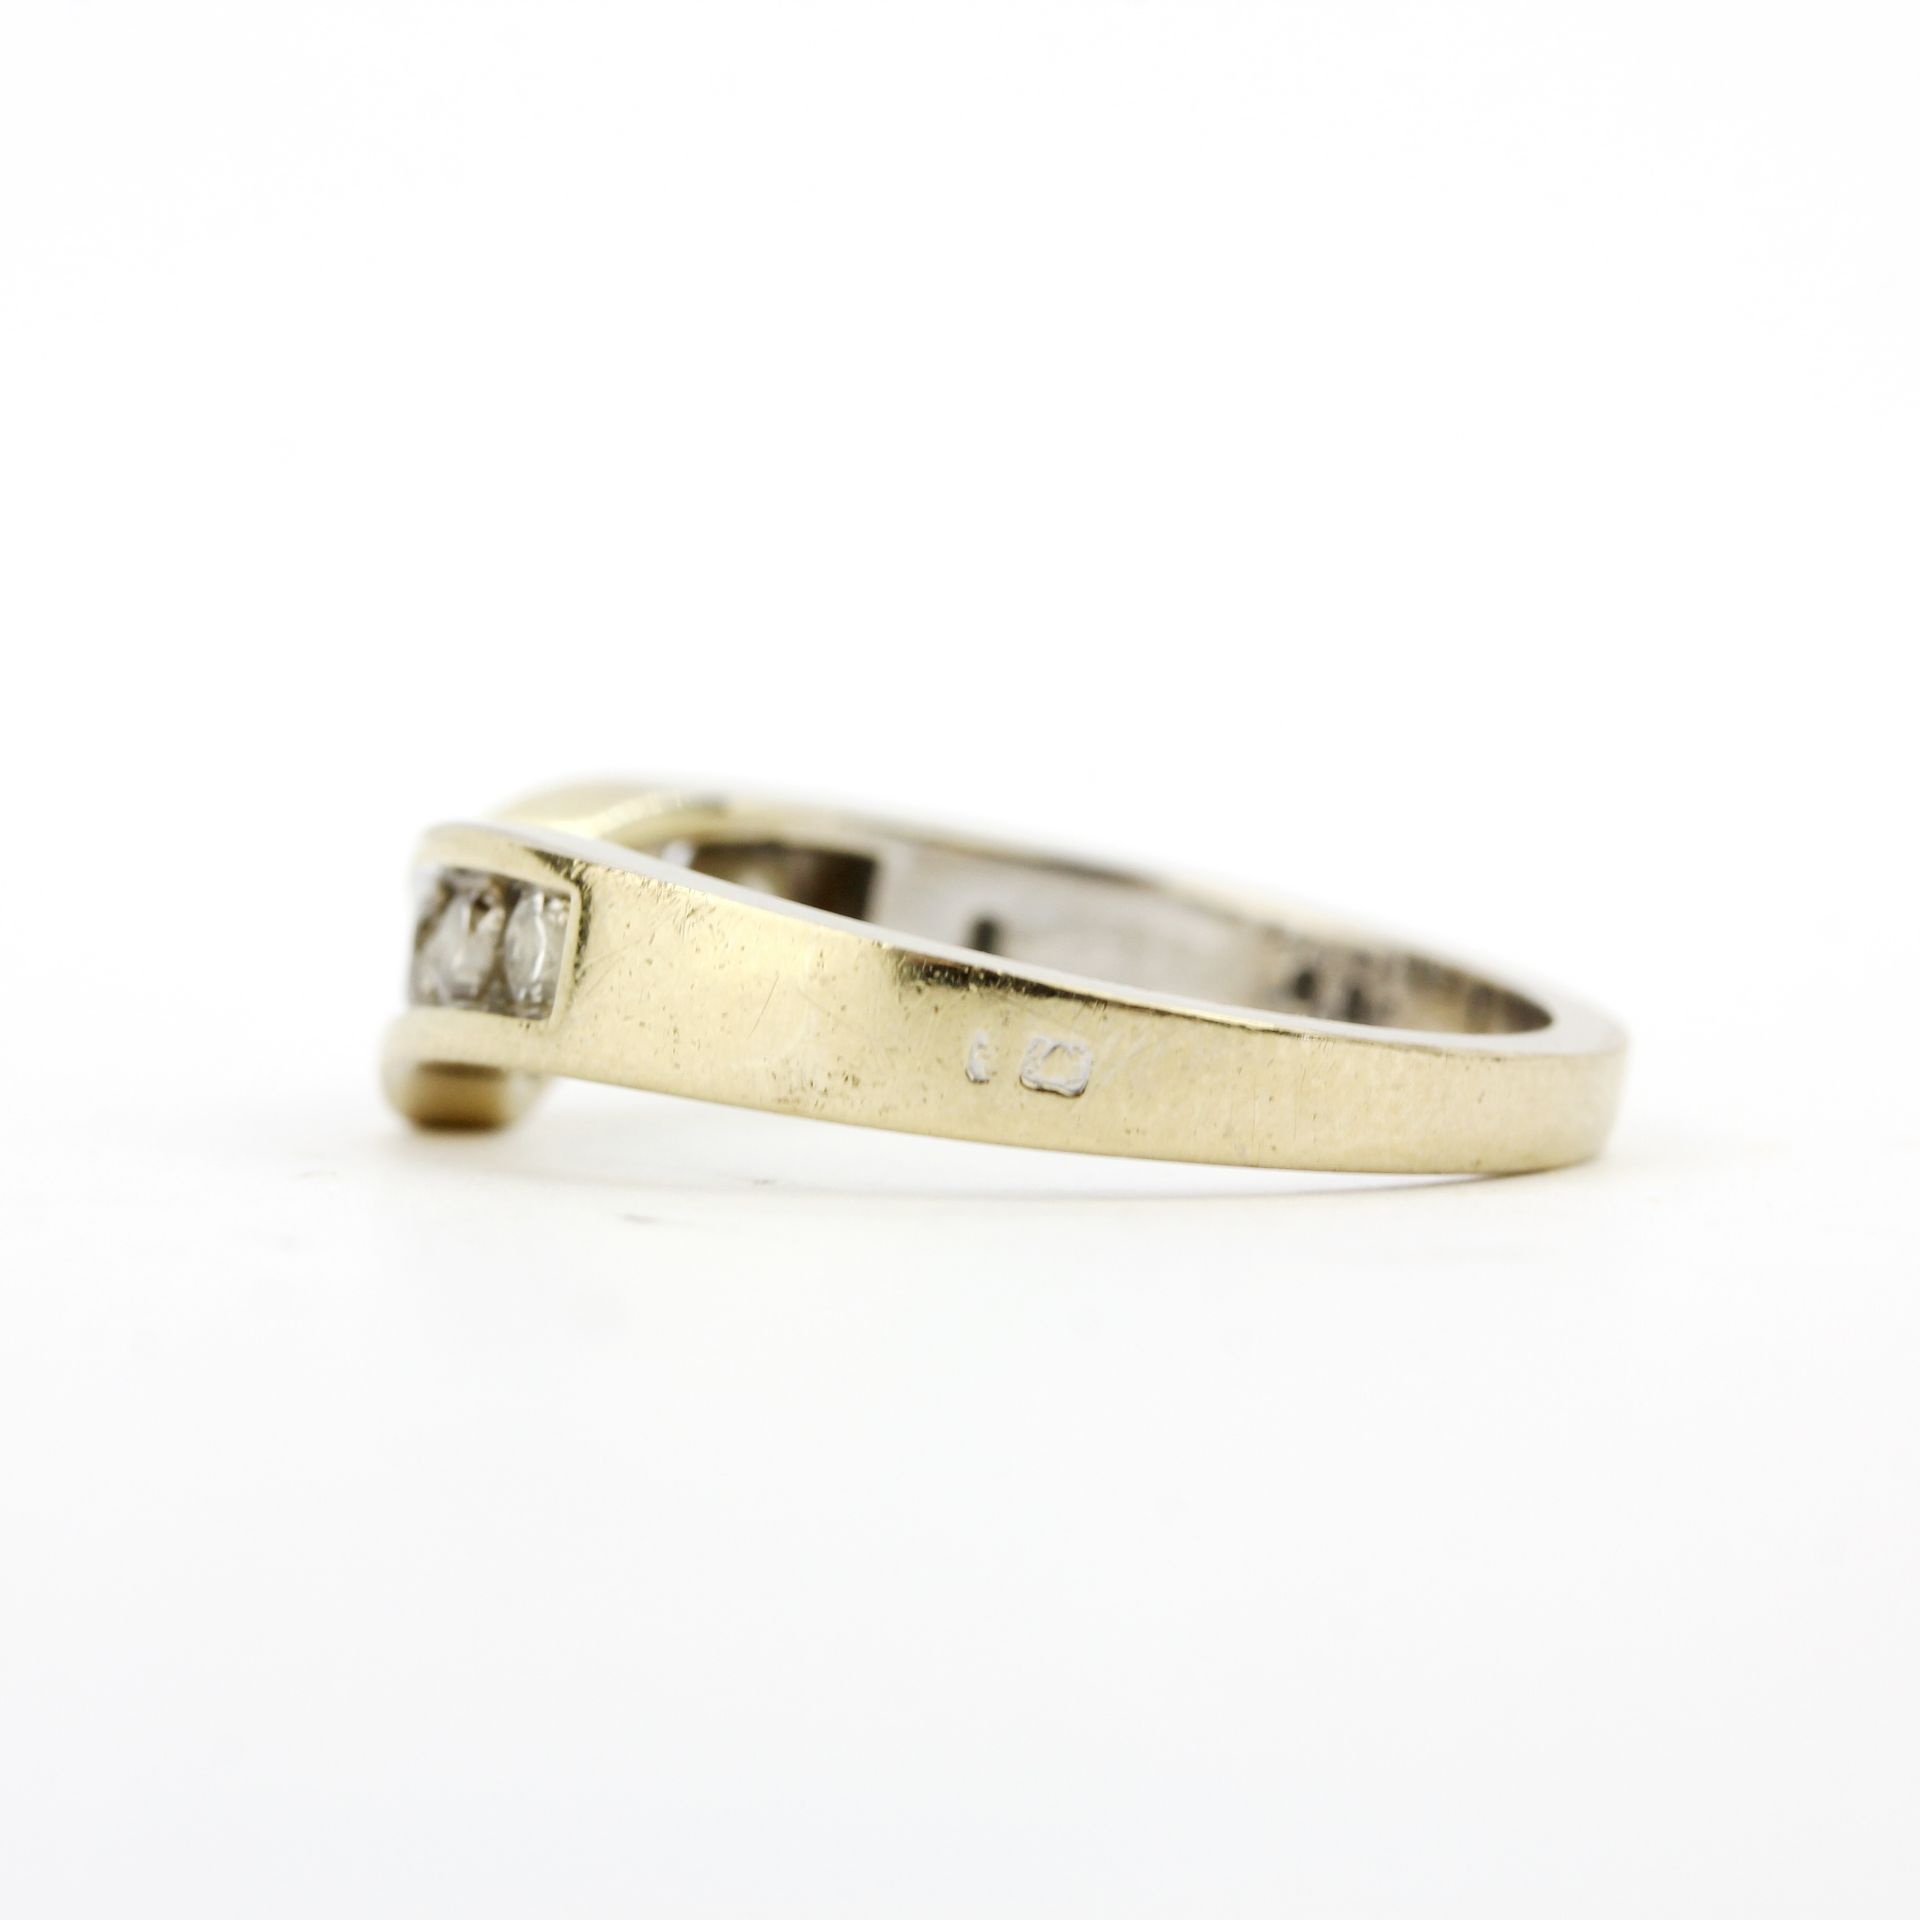 An 18ct yellow gold wishbone ring set with brilliant cut diamonds, approx. 0.5ct., ring size N. - Image 3 of 3